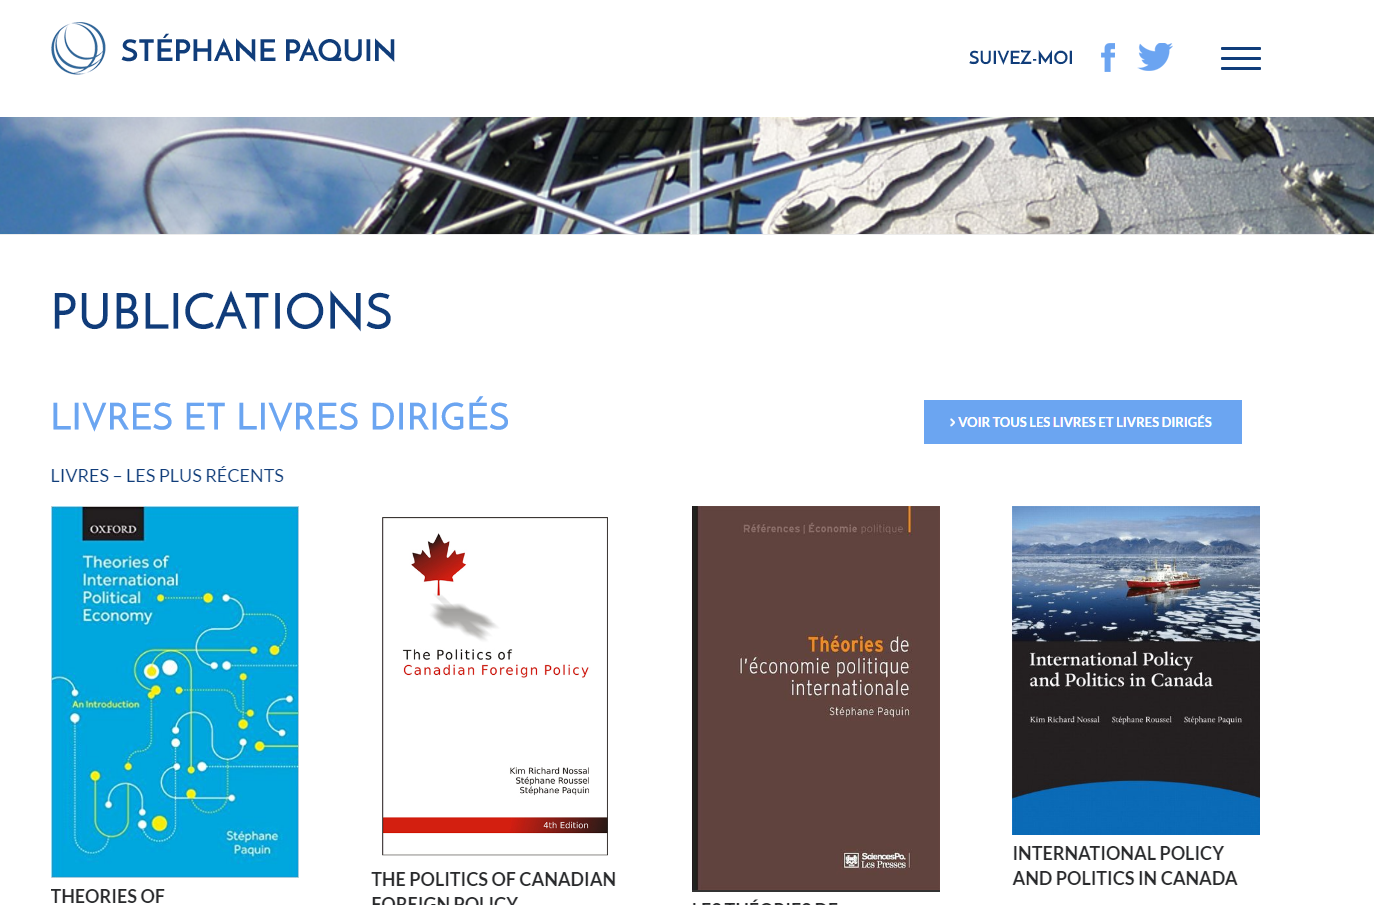 Publications by Stéphane Paquin - Website by Appwapp